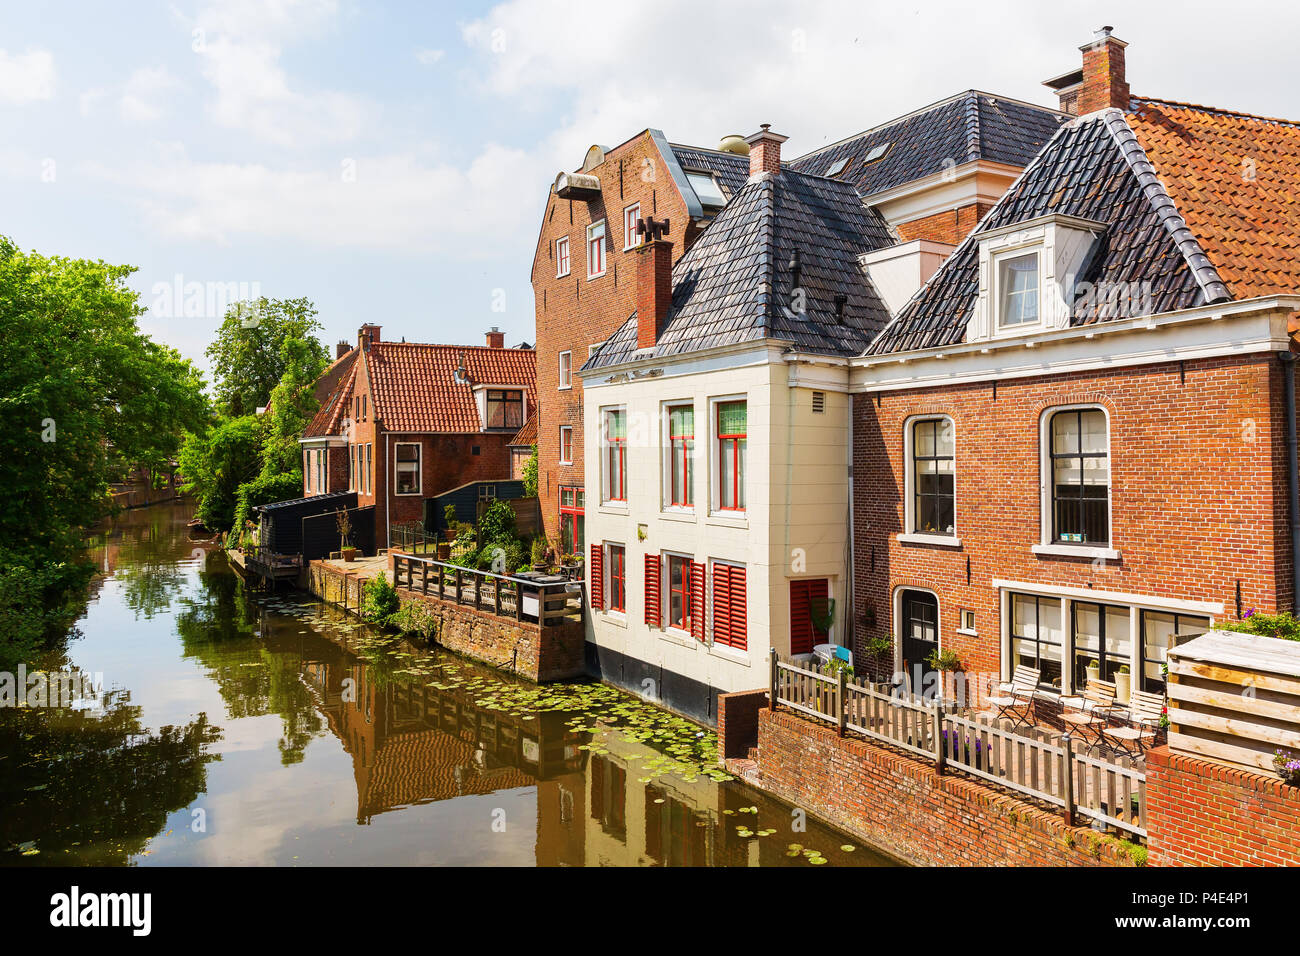 view of a canal with old buildings in Appingedam, Netherlands Stock Photo